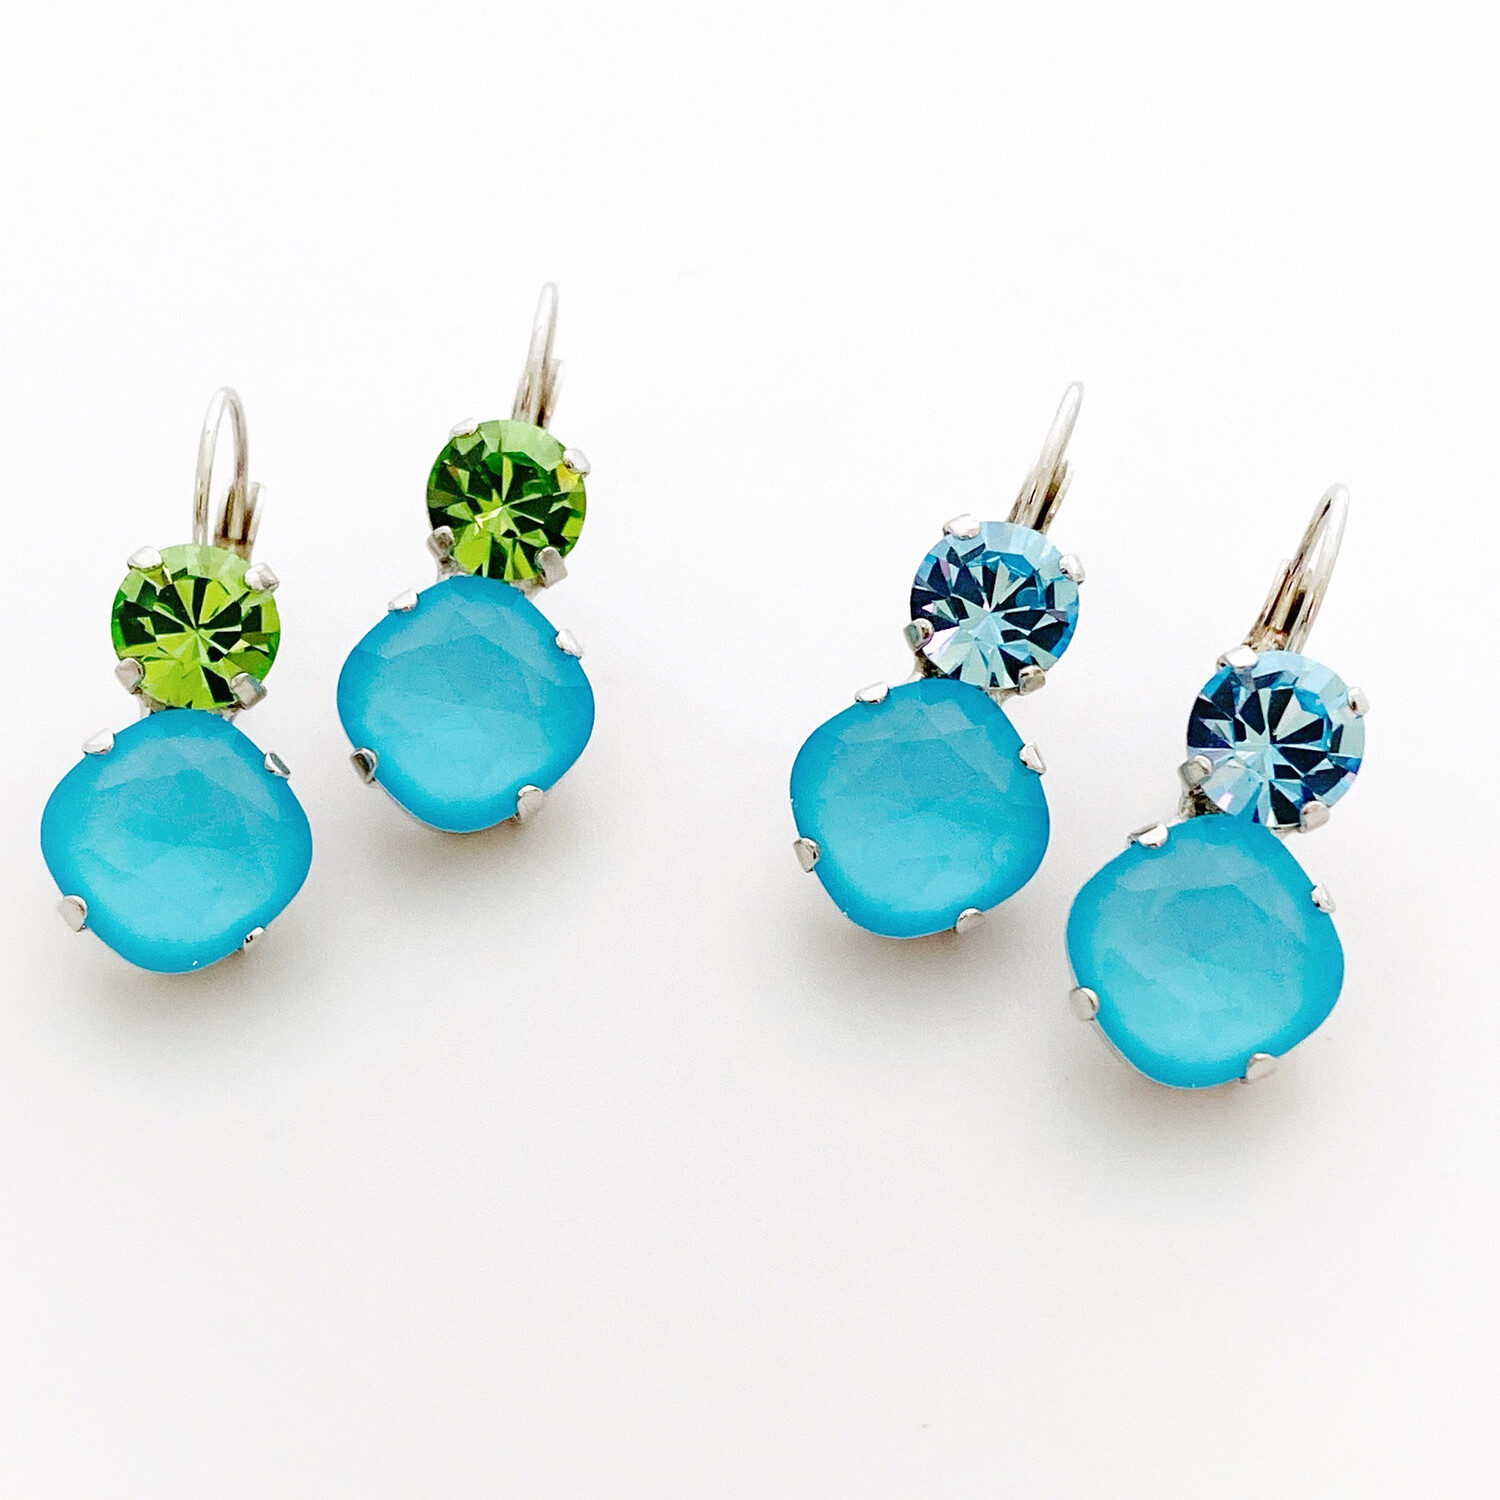 Matte Turquoise Cushion Cut Earrings with either Peridot or Aquamarine